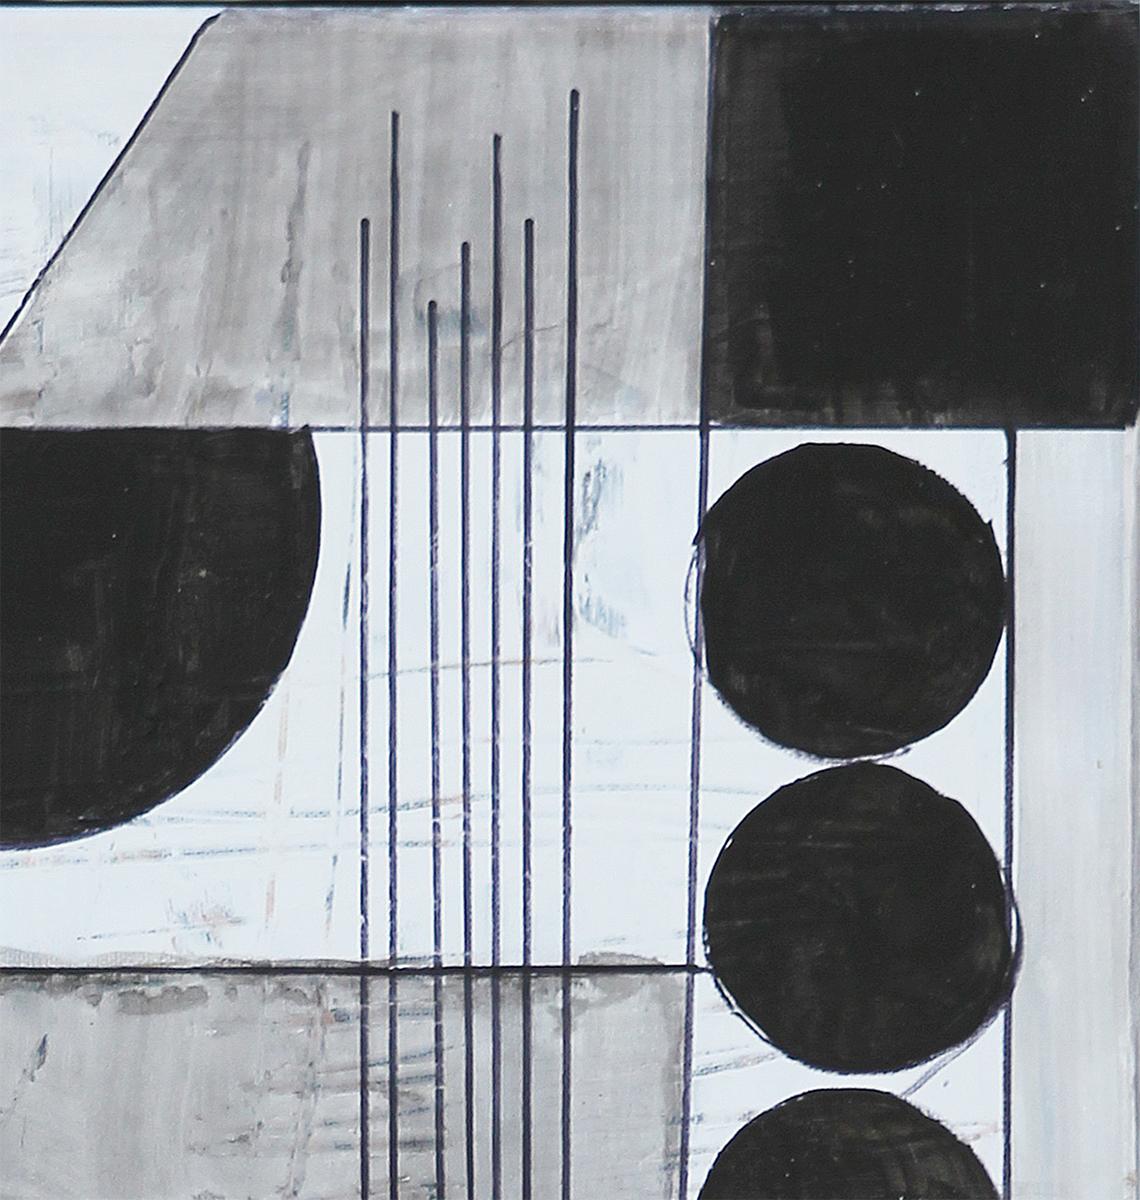 Contemporary black and white geometric abstract painting by Houston, TX artist Larry Martin. The work features a balanced composition of floating circles and triangles. Signed and dated on reverse. Currently unframed, but options are